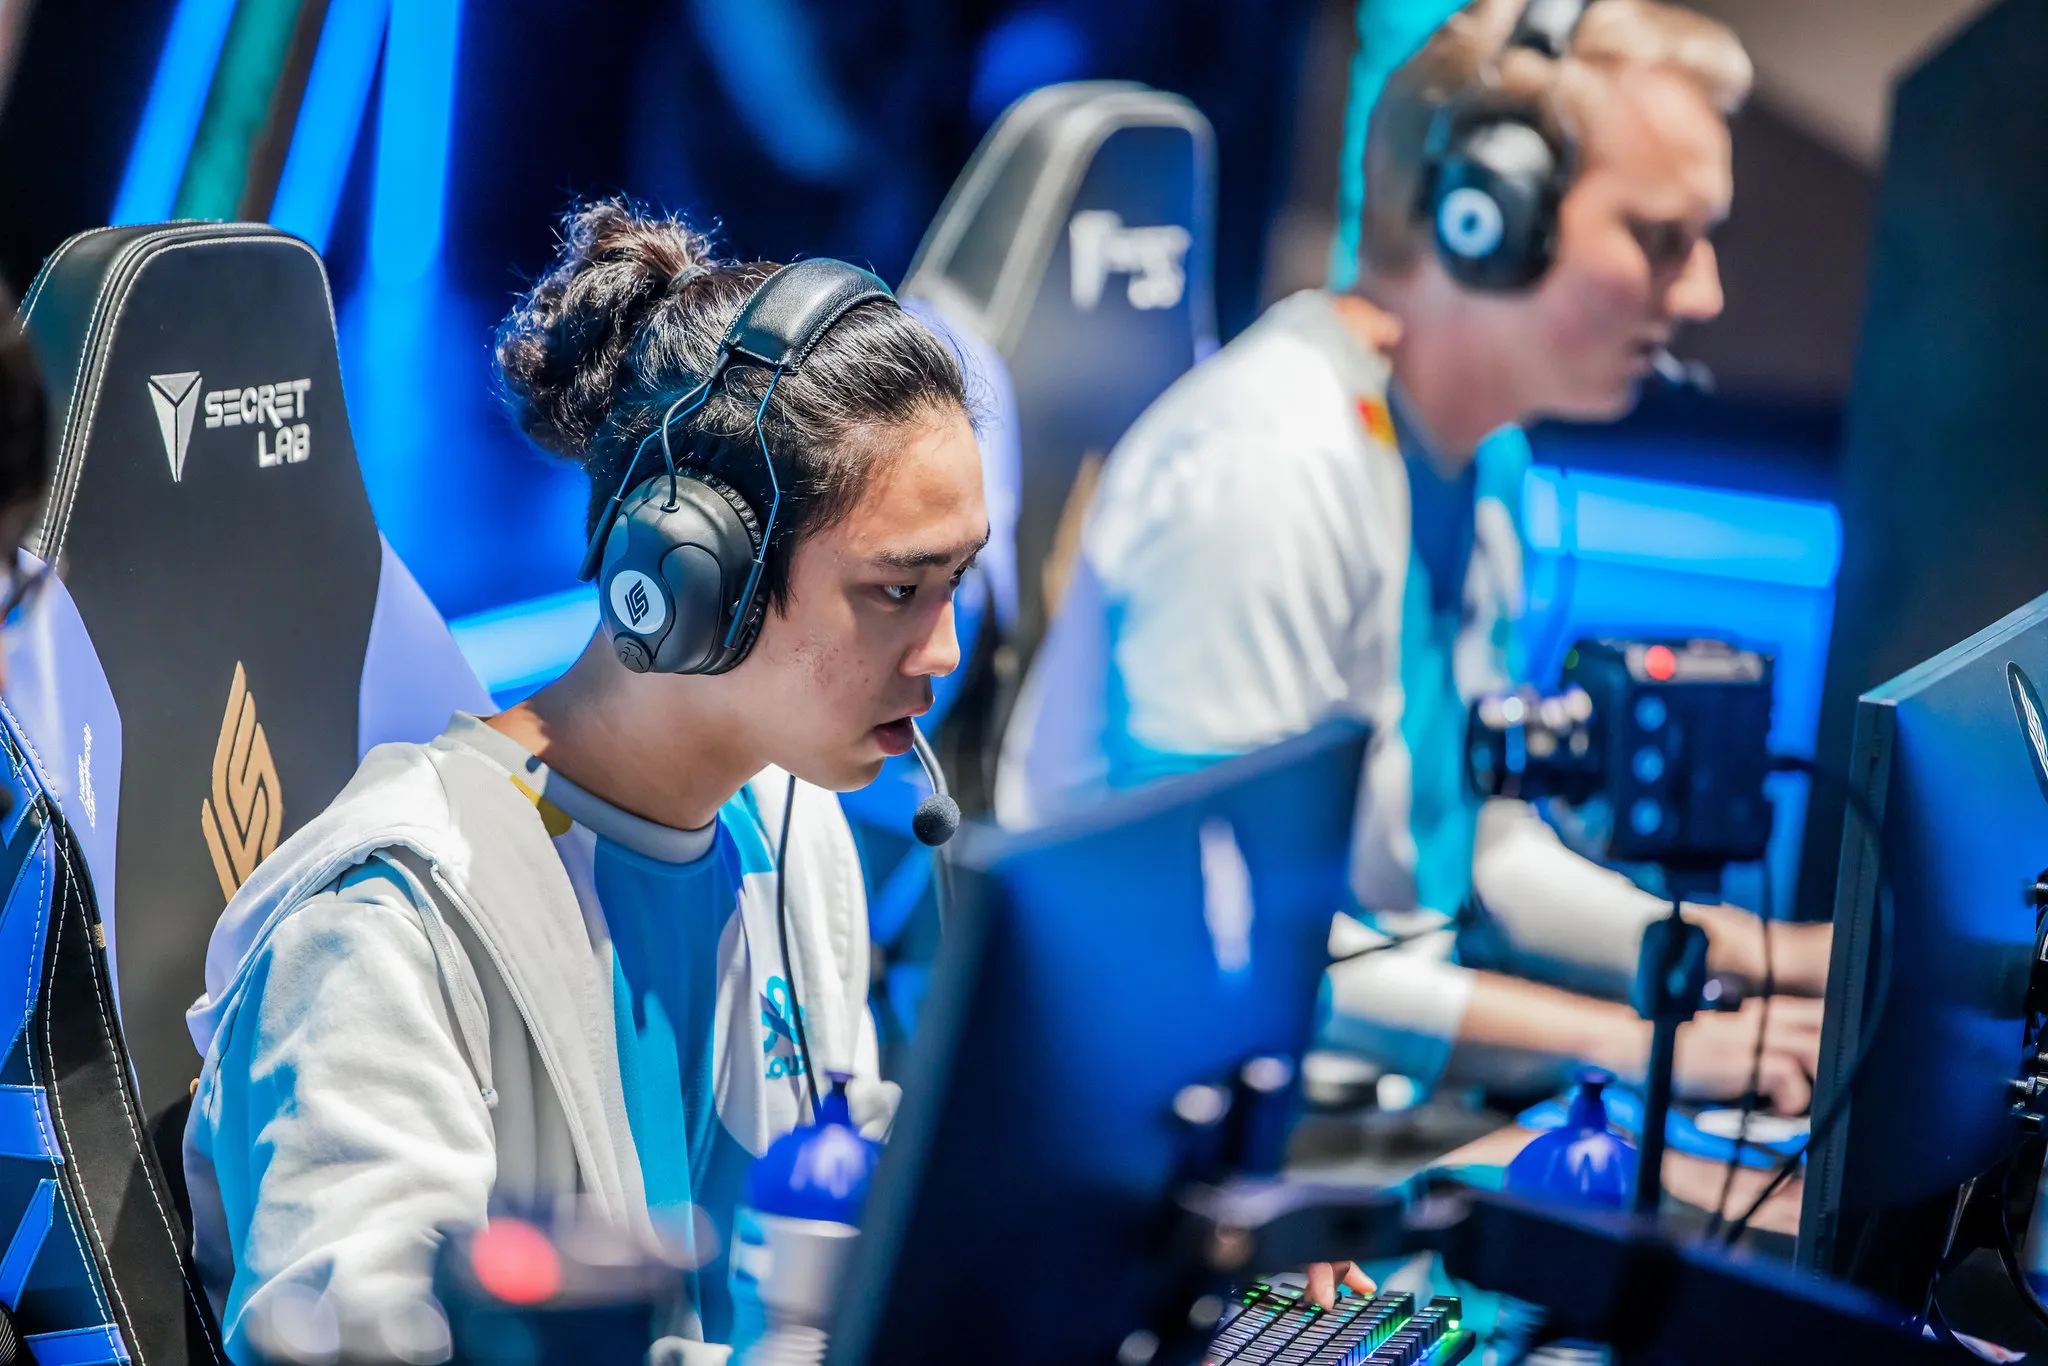 Reigning LCS MVP Berserker wastes no time powers C9 to first win of